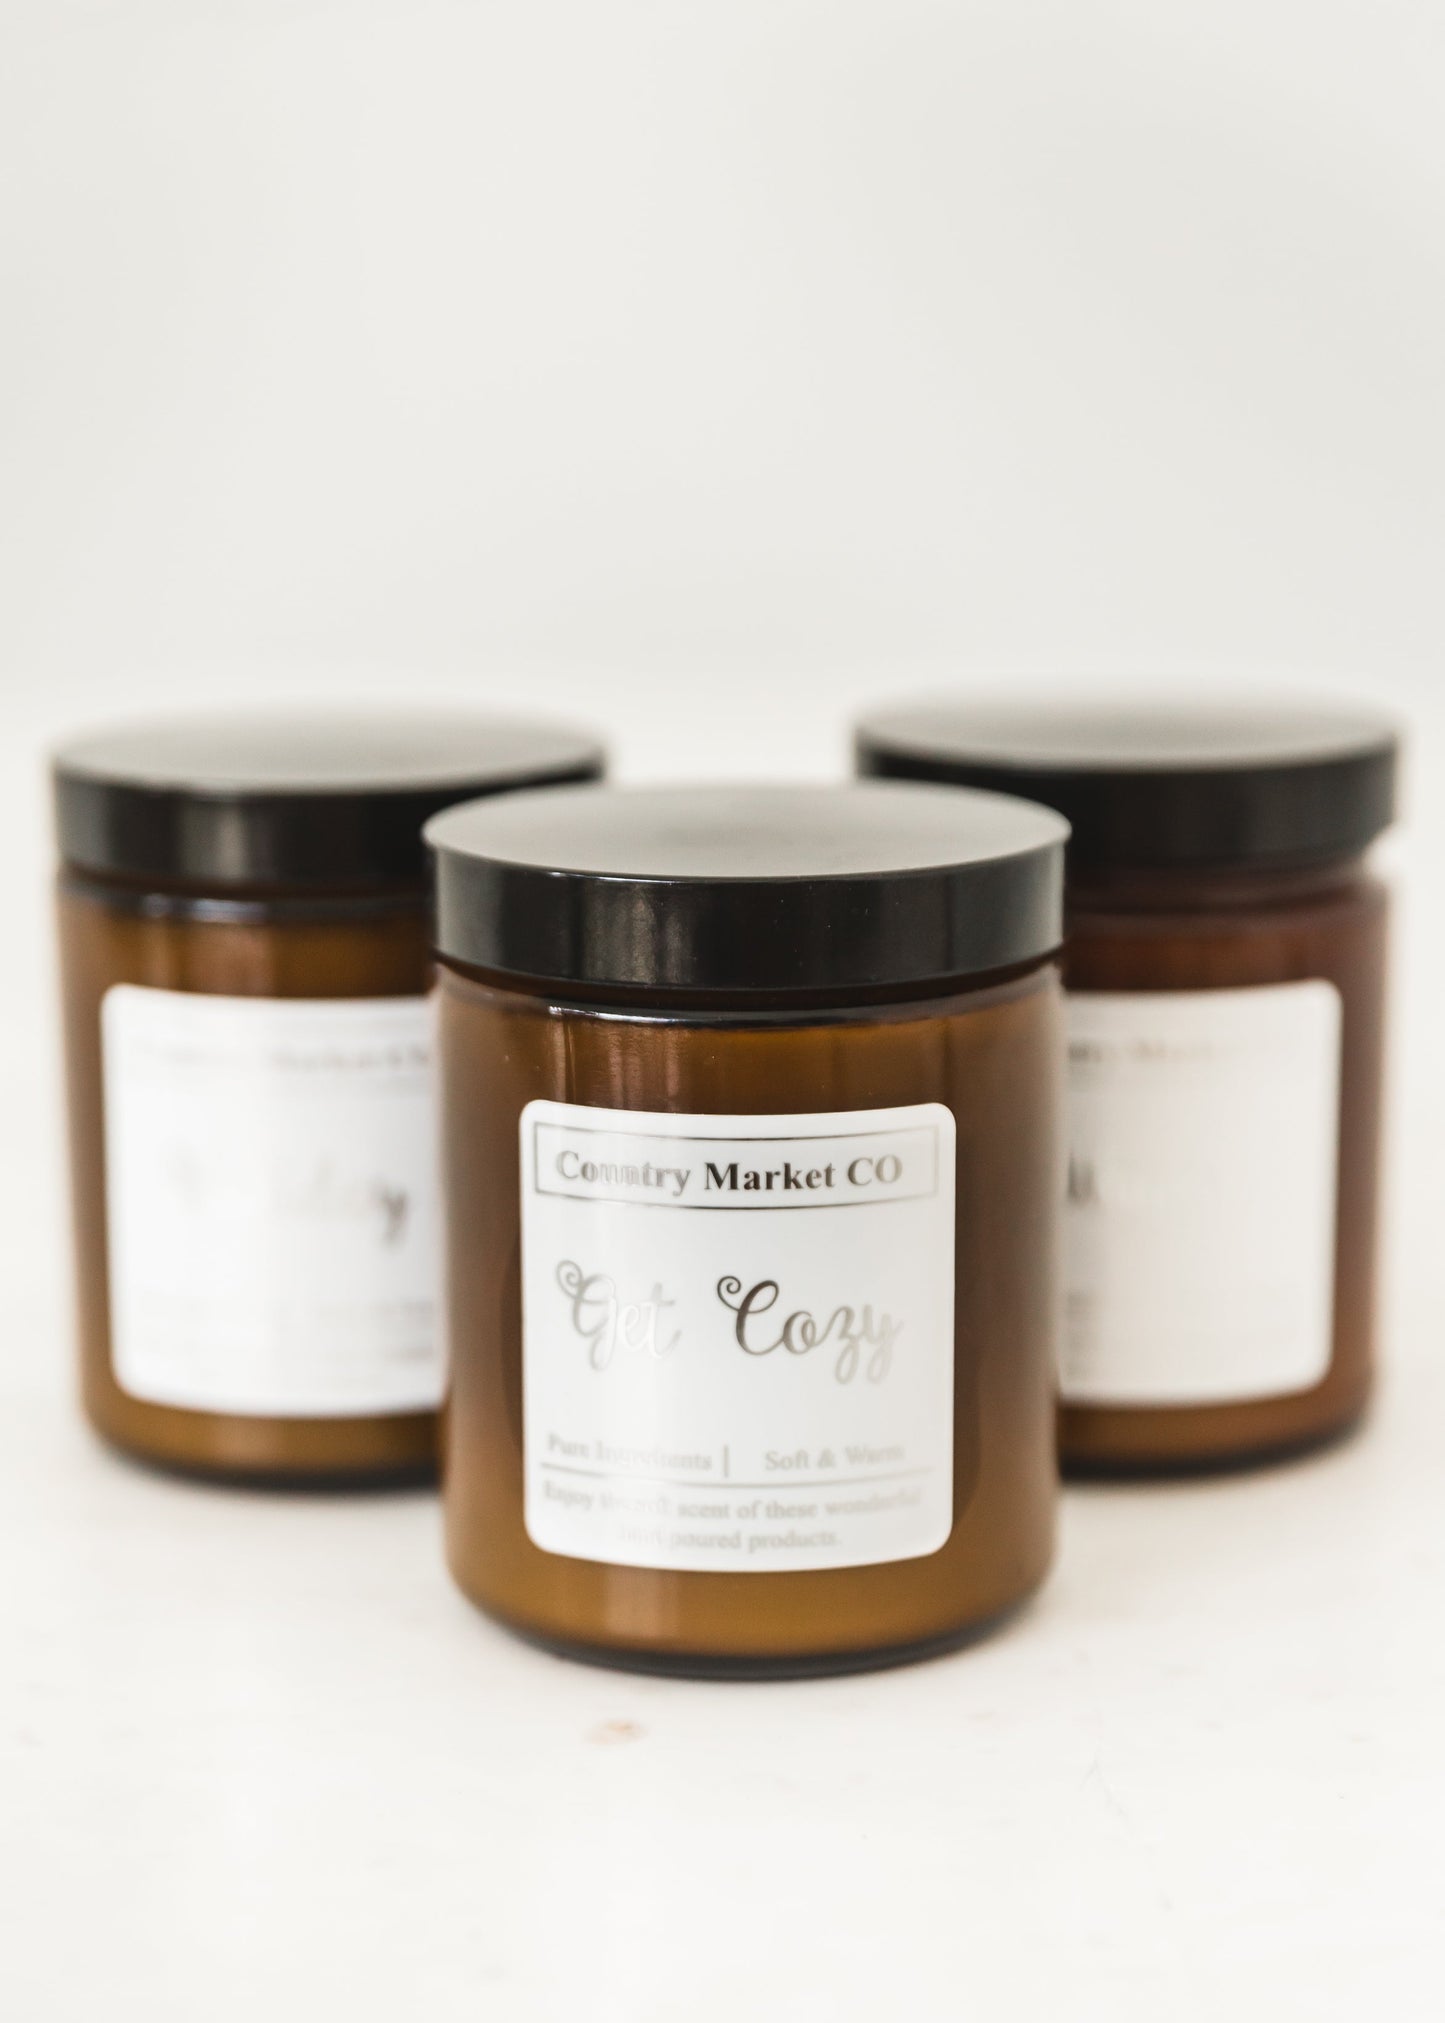 Get Cozy Soy Candle - FINAL SALE Home & Lifestyle